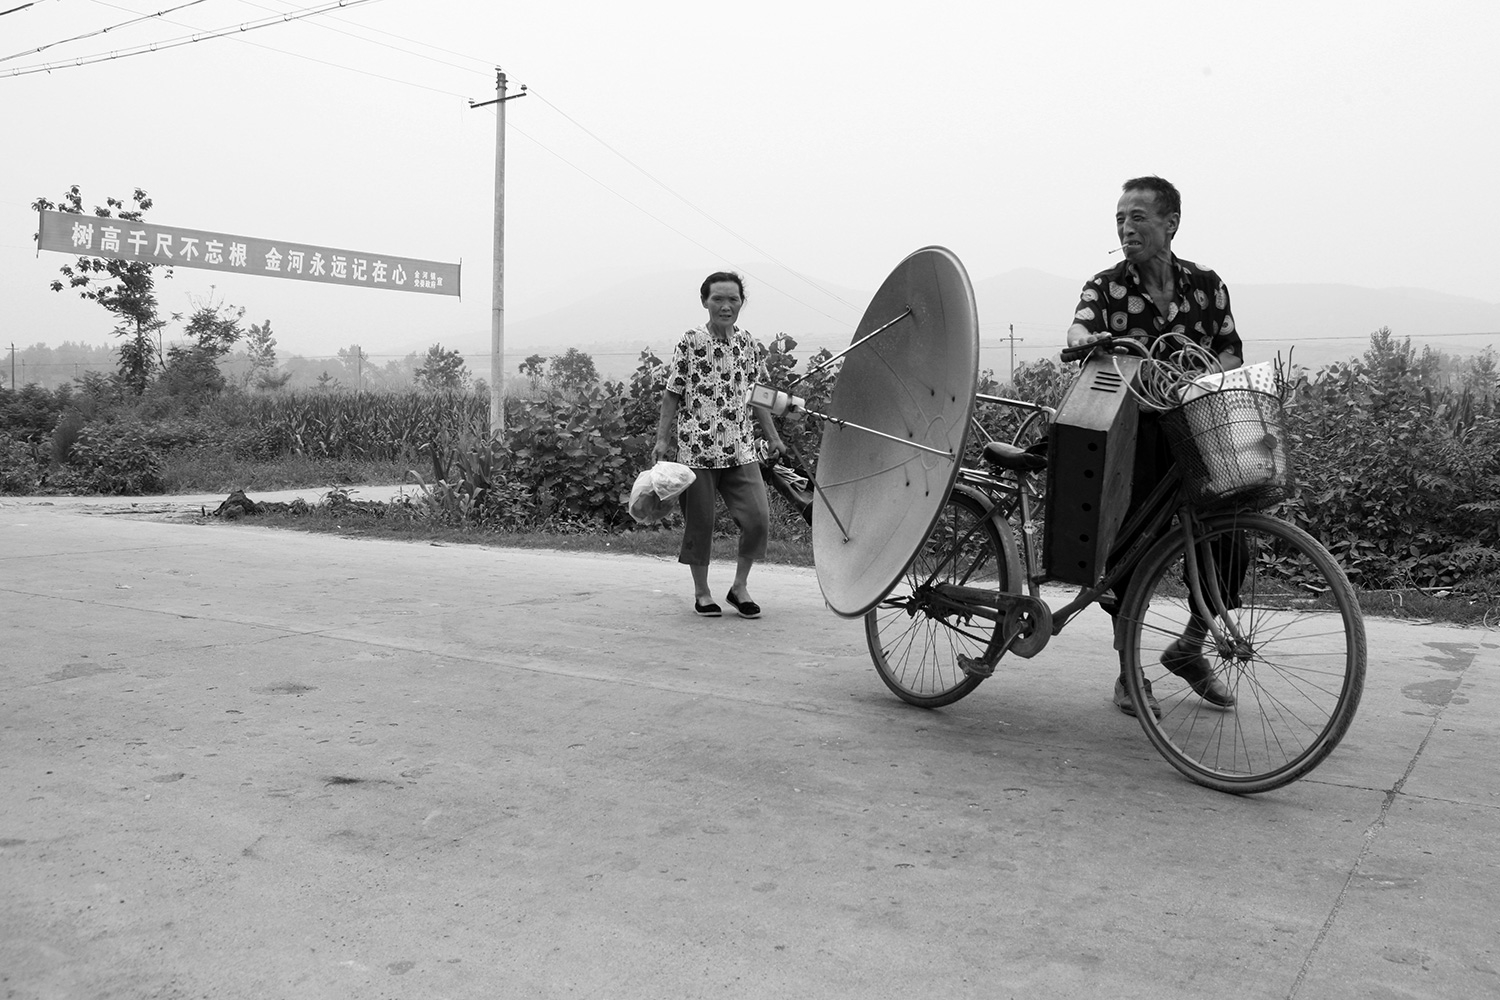 A farmer brings his dismantled TV antenna equipment with him as he leaves Jinhe. Nearly all material goods, with even the slightest bit of worth, were carted away; little was left behind.